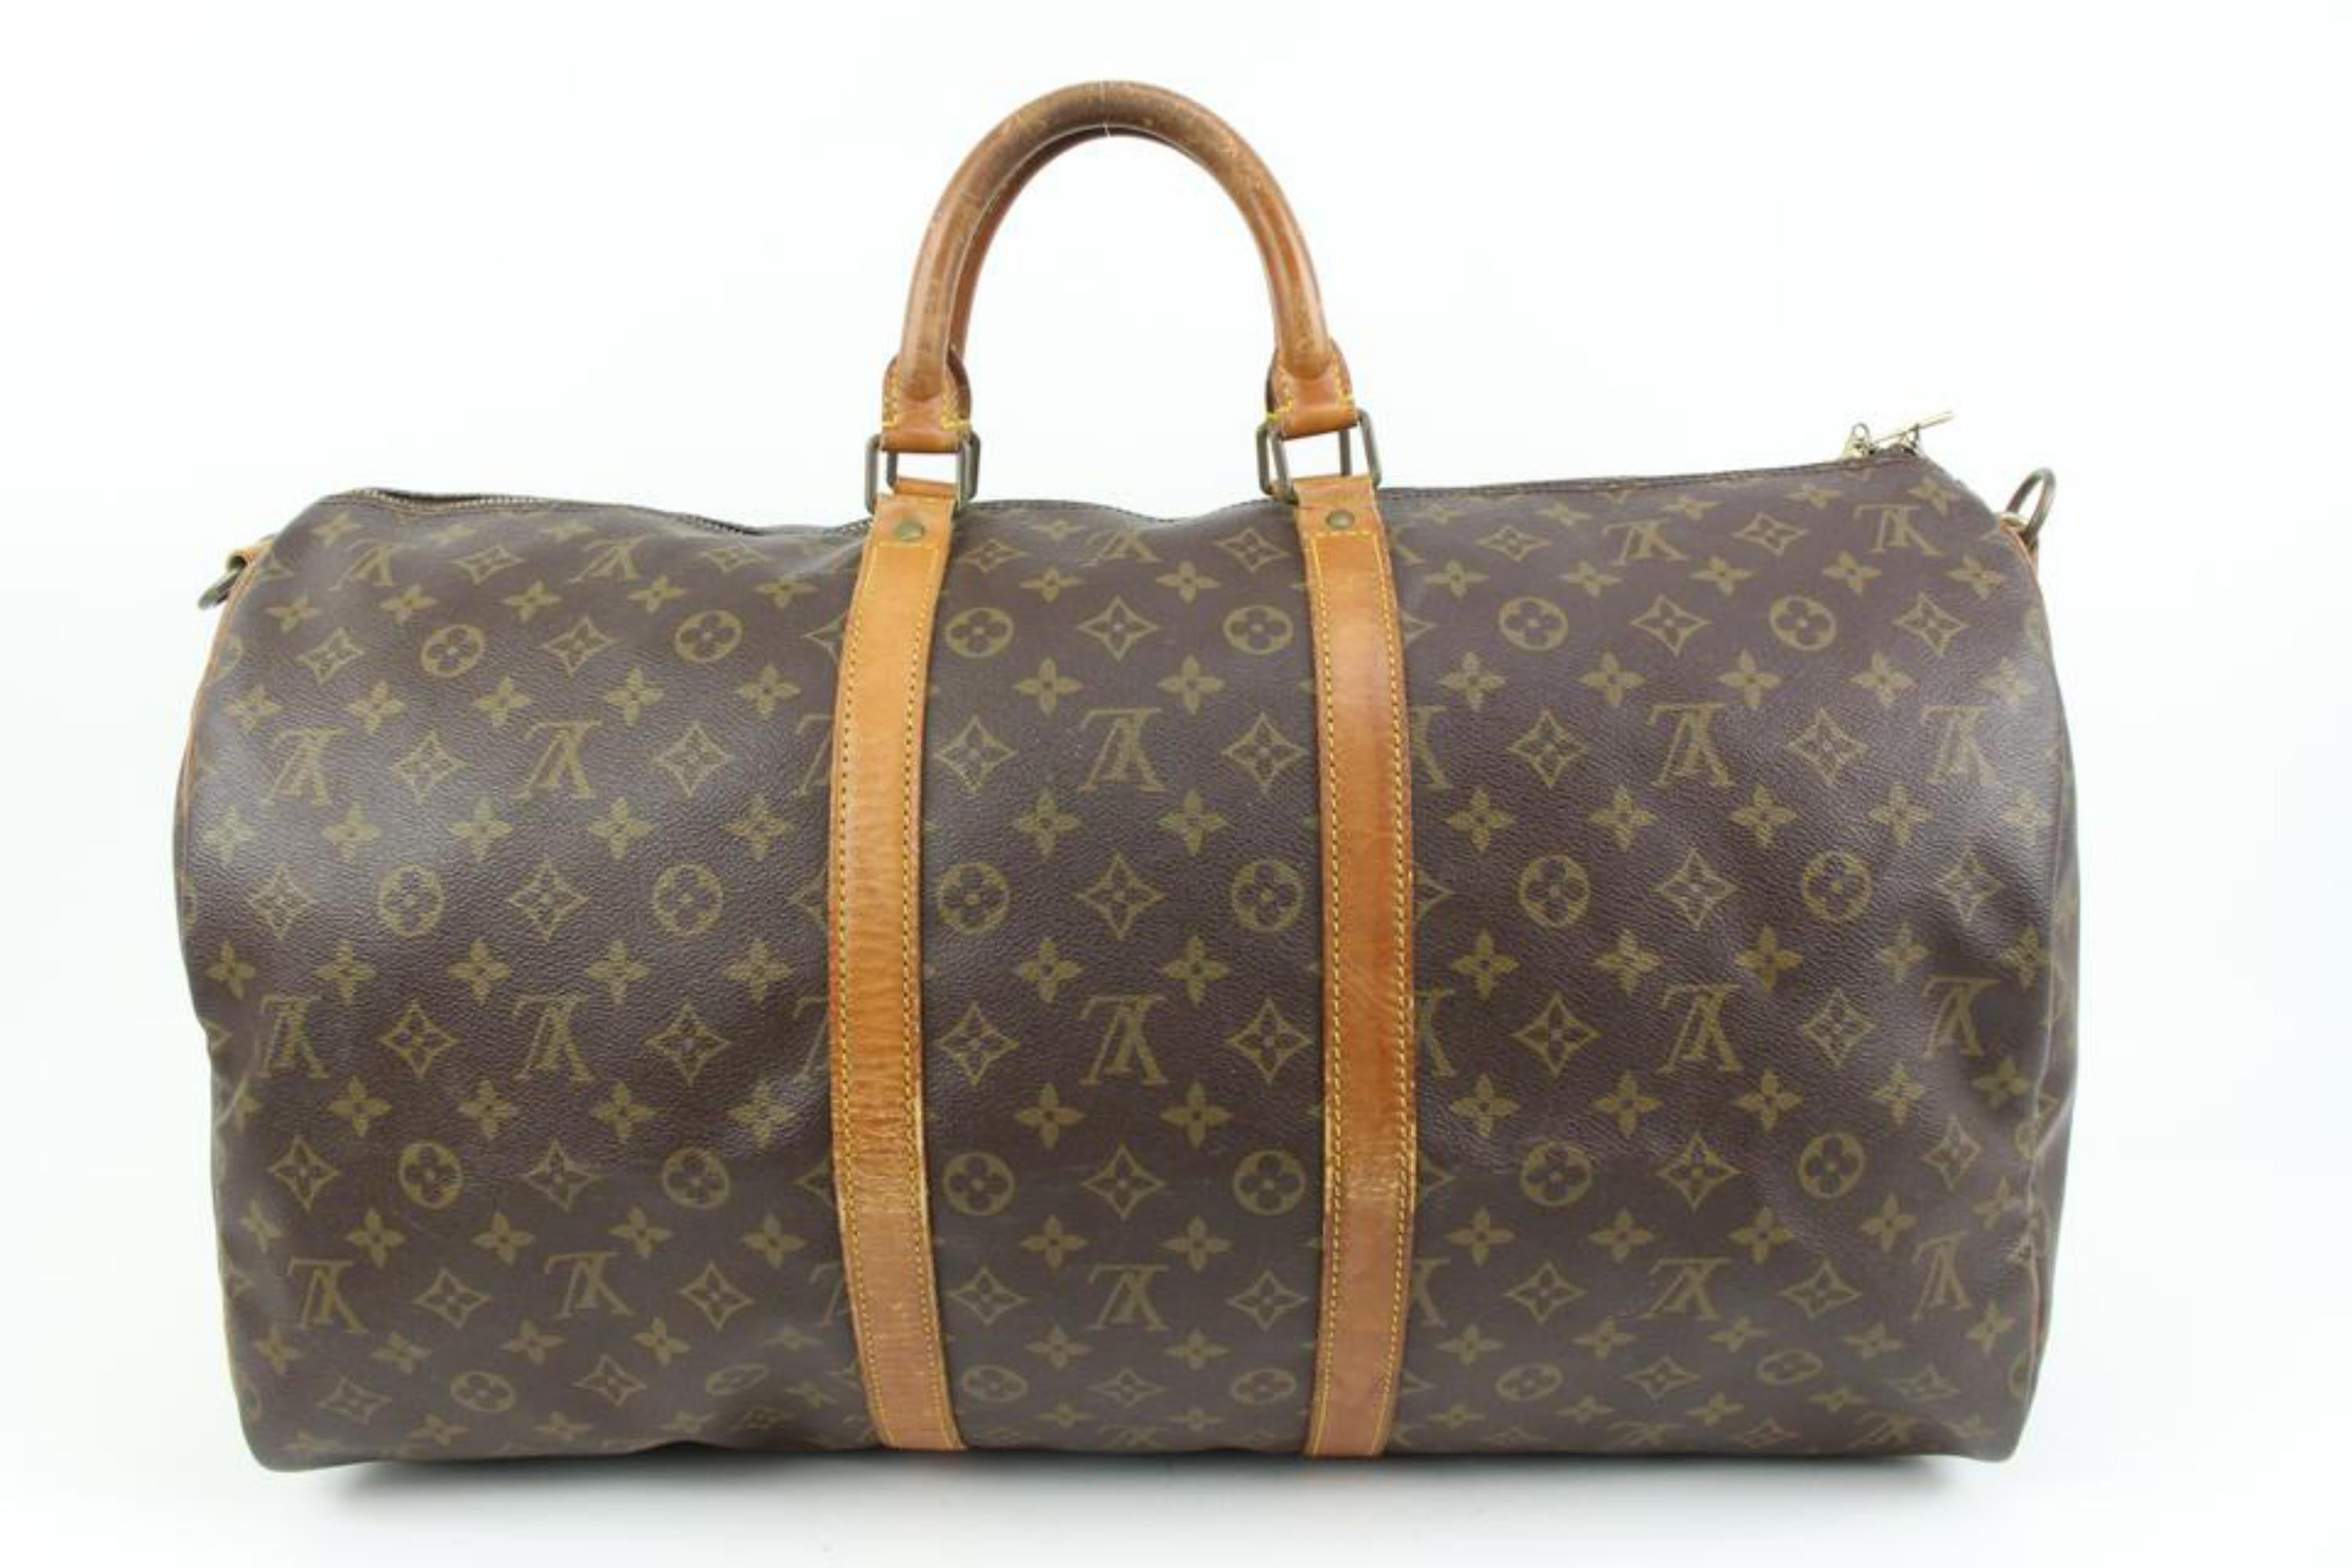 Louis Vuitton Monogram Keepall Bandouliere 55 Duffle Bag with Strap 43lz413s 2